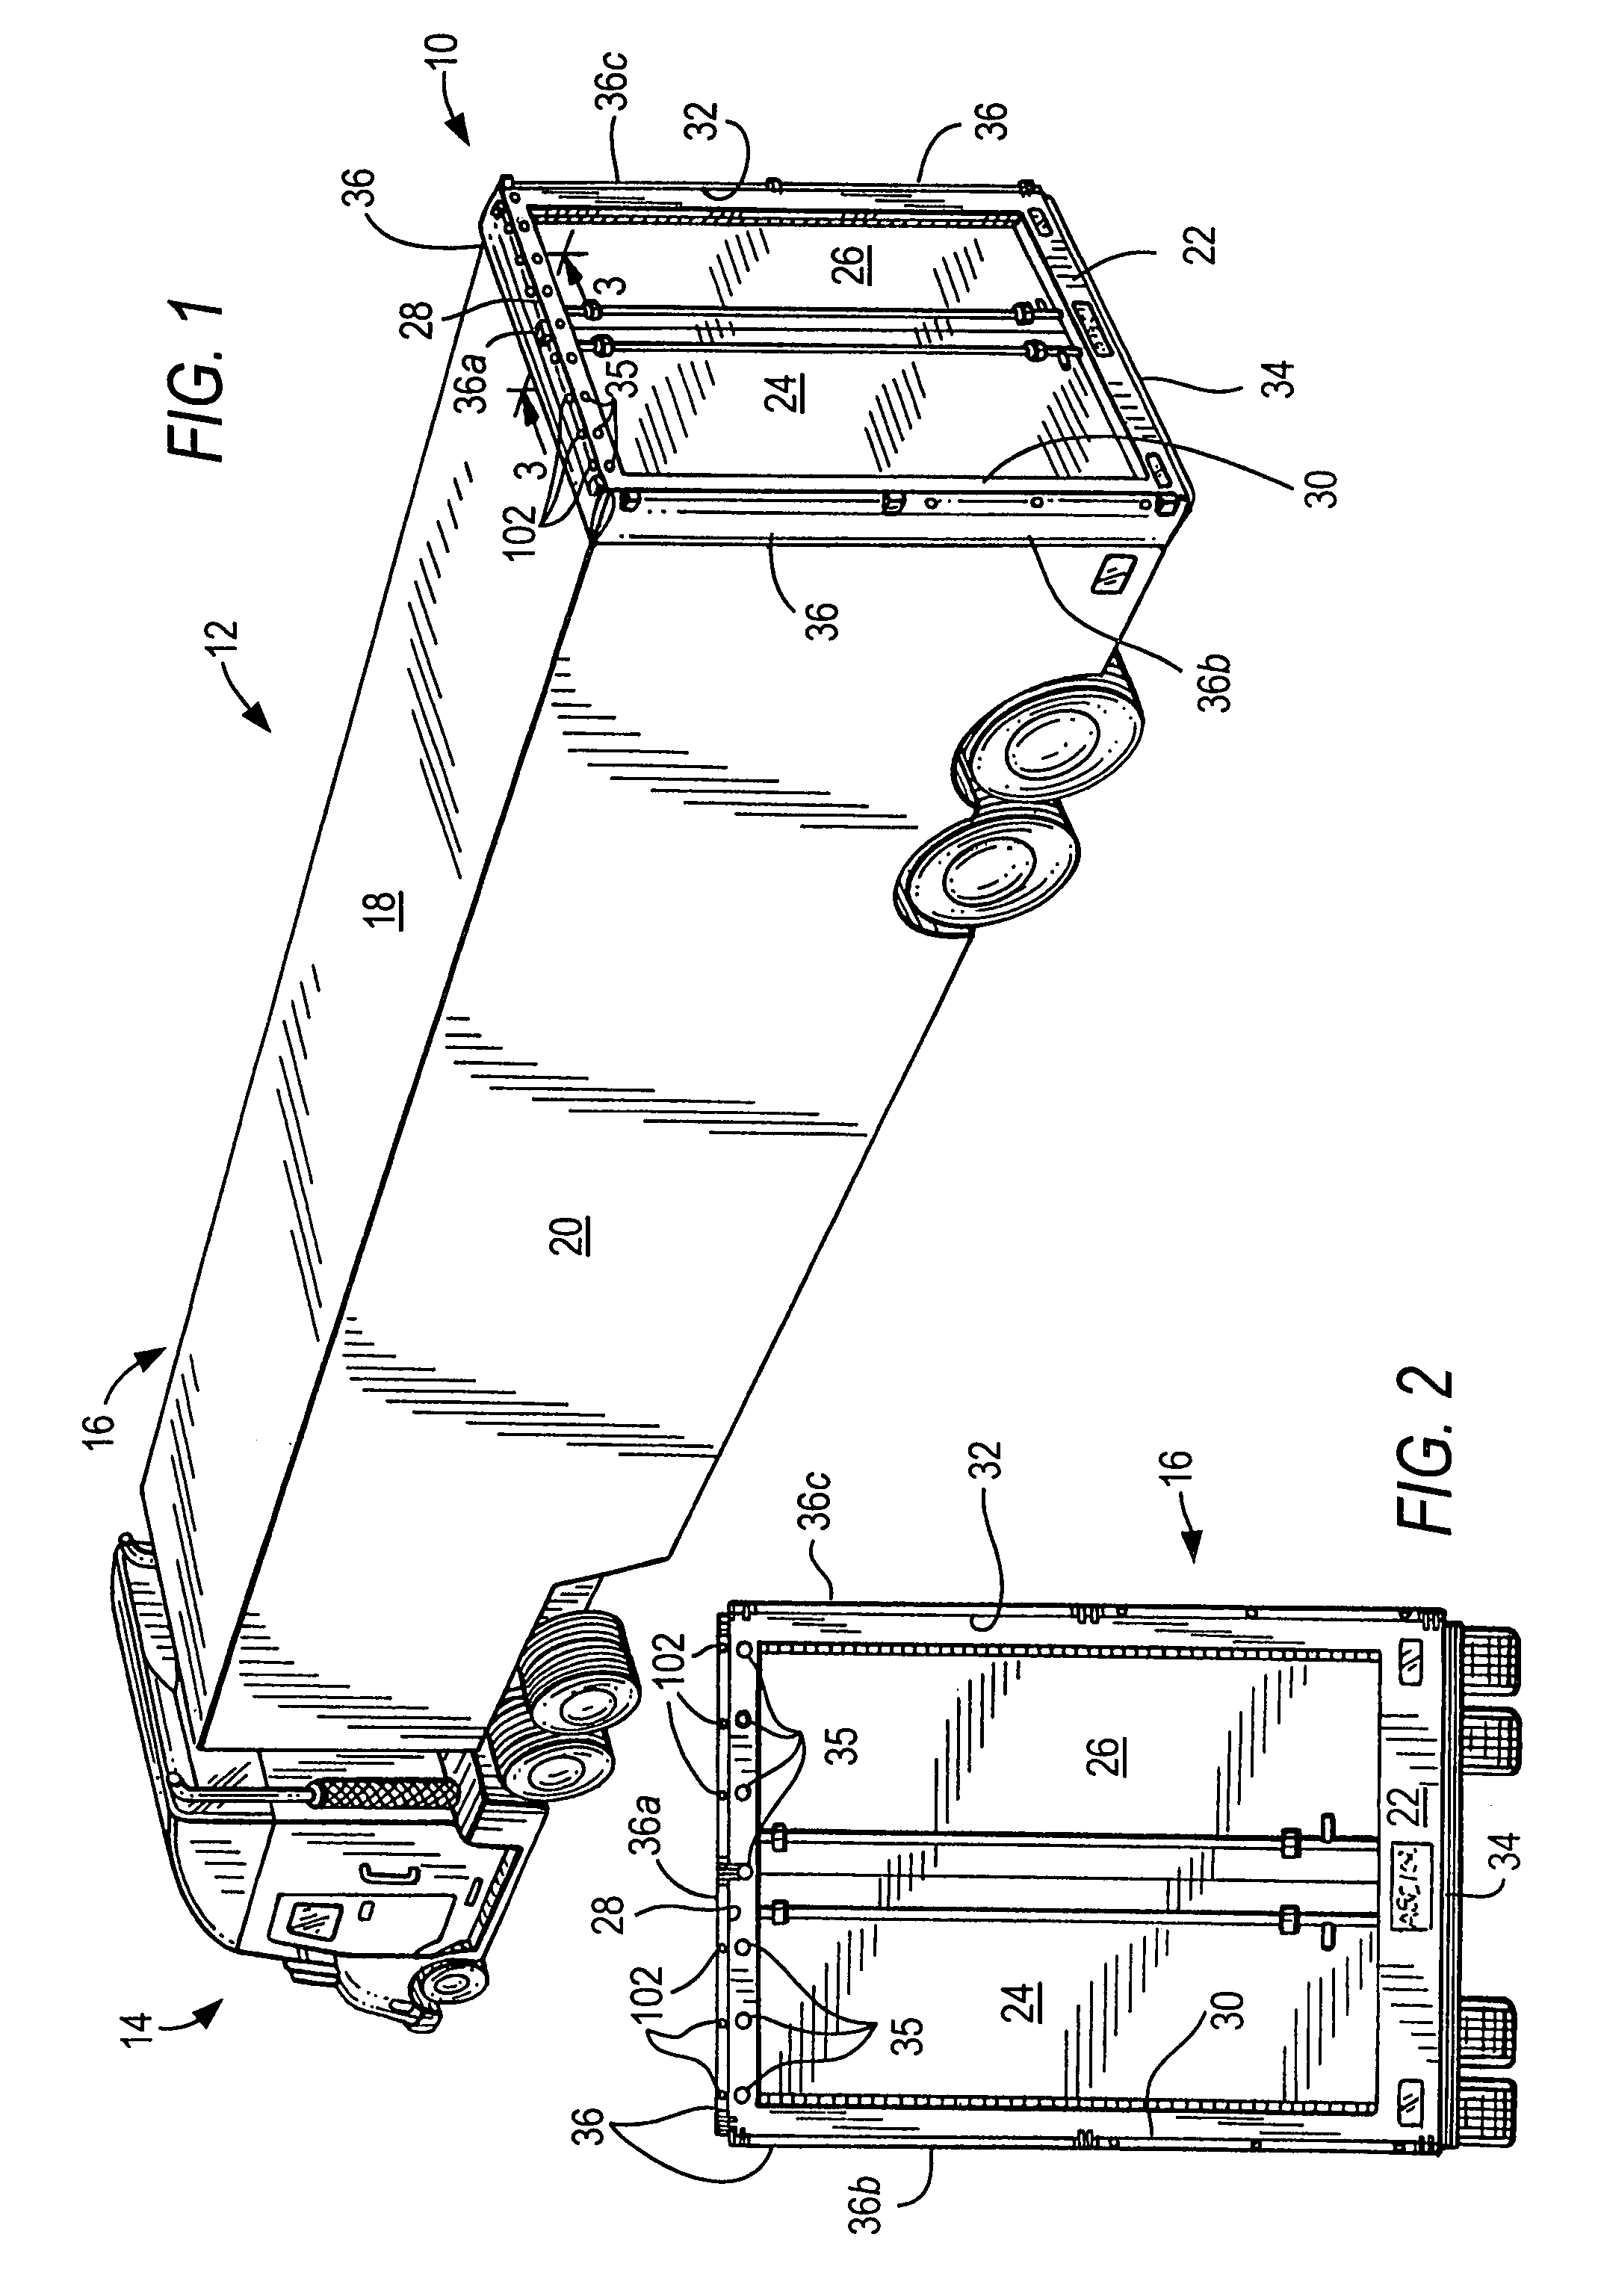 Retractable air deflection apparatus for reduction of vehicular air drag